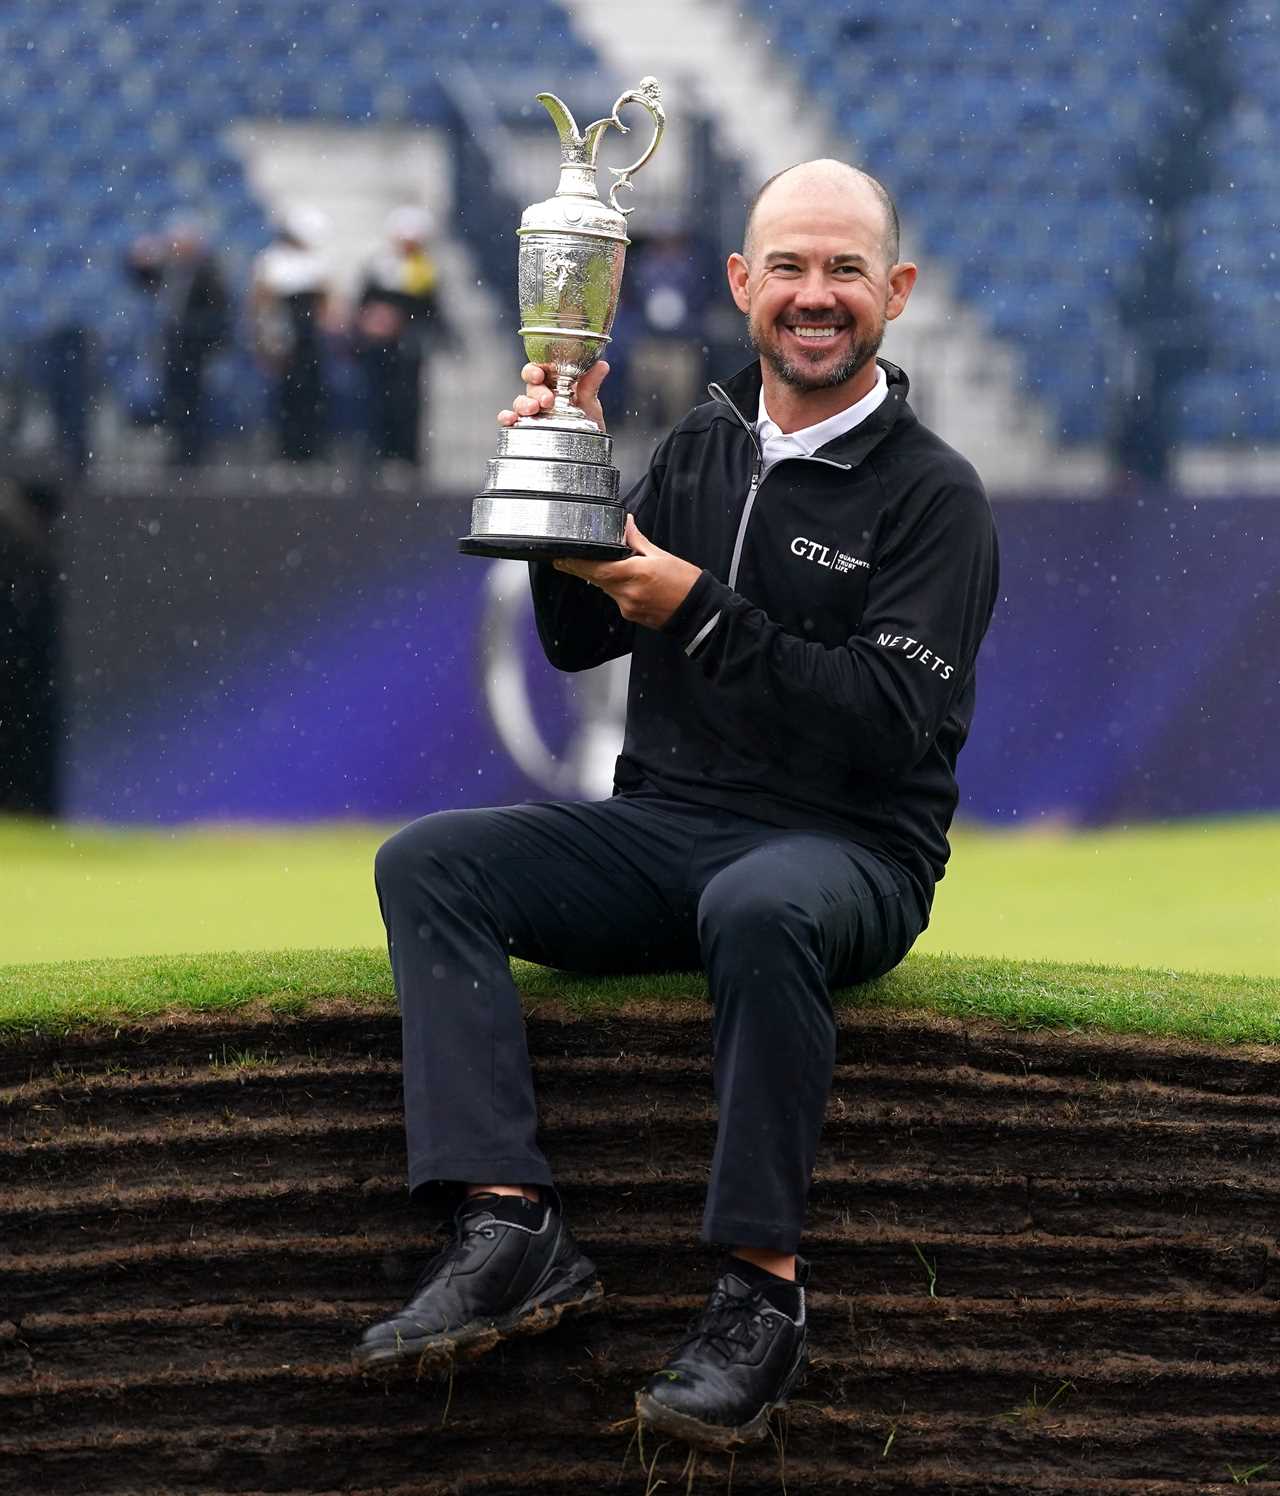 USA's Brian Harman celebrates with the Claret Jug after winning The Open at Royal Liverpool, Wirral. Picture date: Sunday July 23, 2023. PA Photo. See PA story GOLF Open. Photo credit should read: David Davies/PA Wire. RESTRICTIONS: Editorial use only. No commercial use. Still image use only. The Open Championship logo and clear link to The Open website (TheOpen.com) to be included on website publishing.